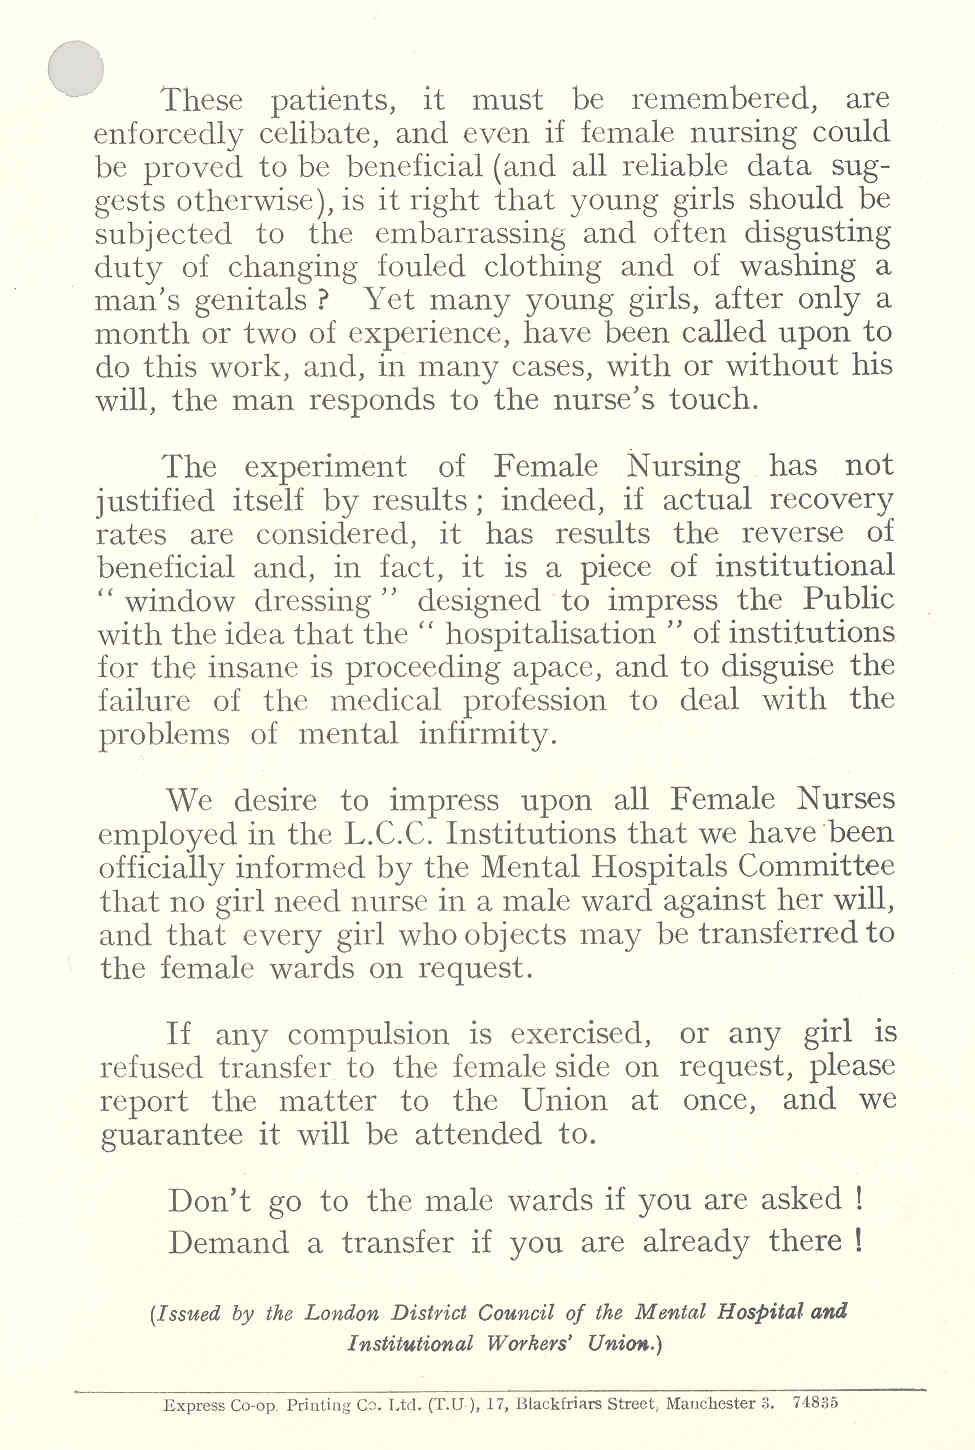 'Female nursing in male wards of mental hospitals: The position in London', undated [c.1936]